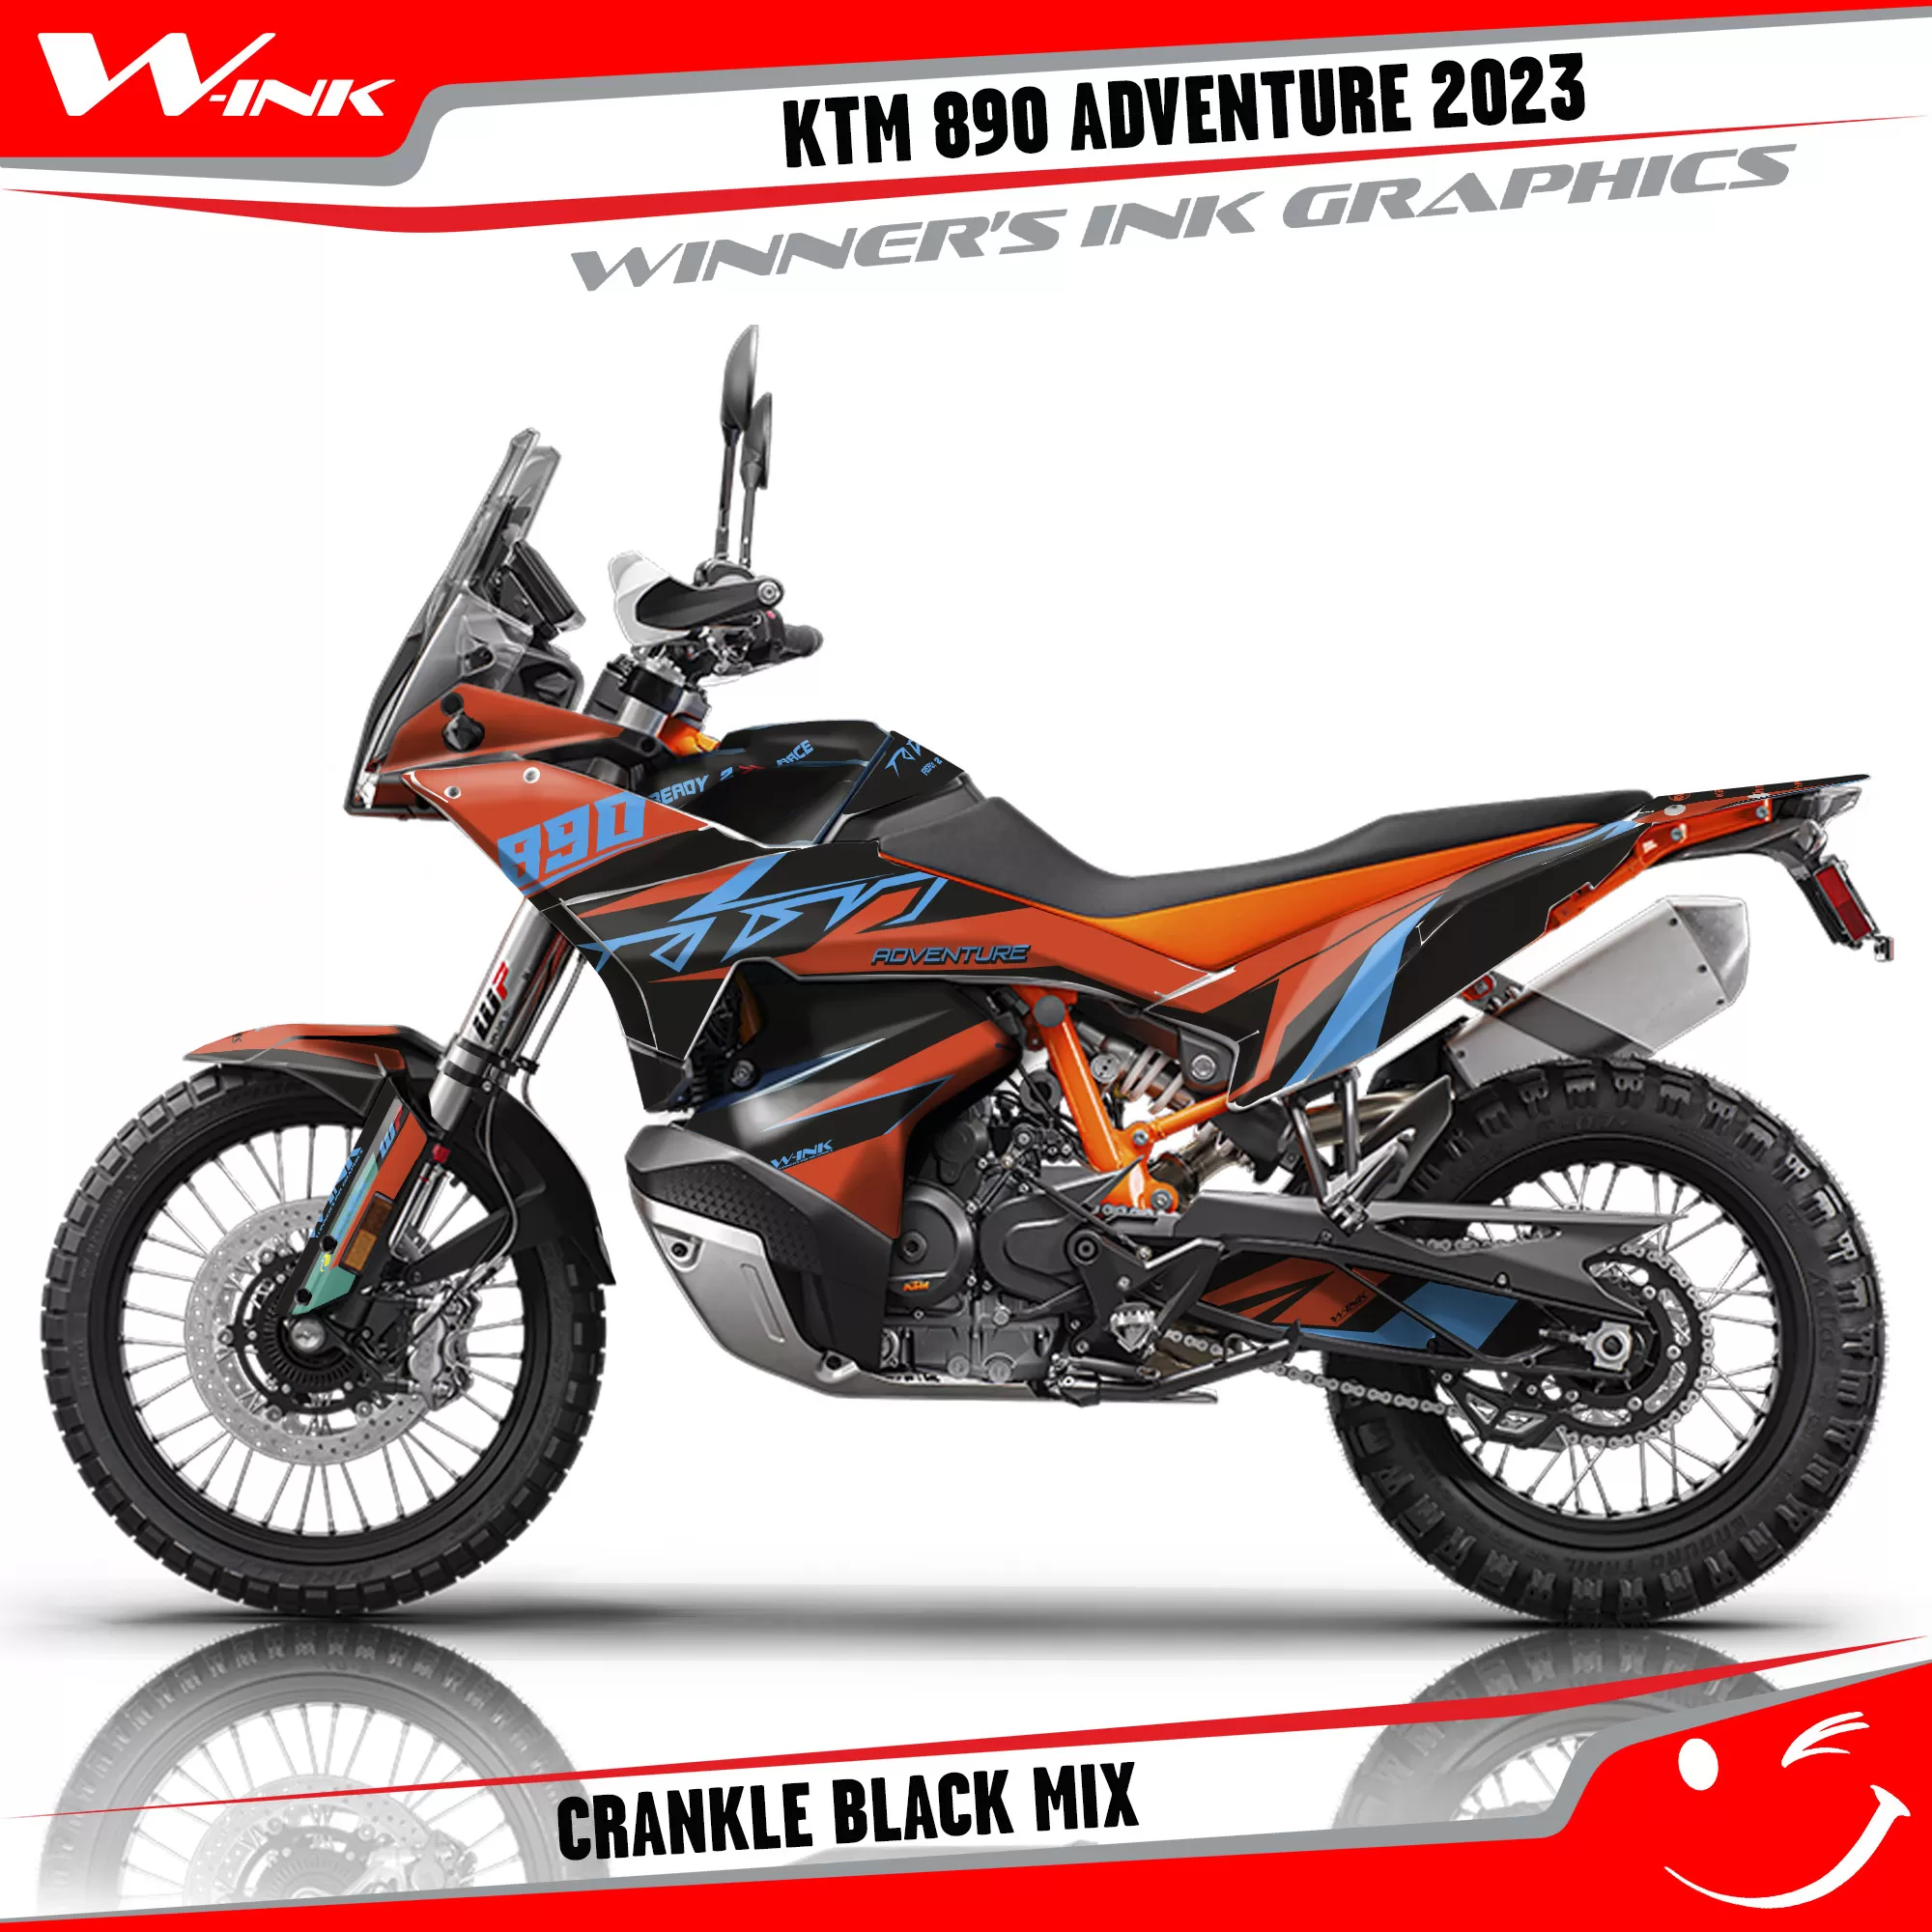 Adventure-890-2023-graphics-kit-and-decals-with-design-Crankle-Black-Mix